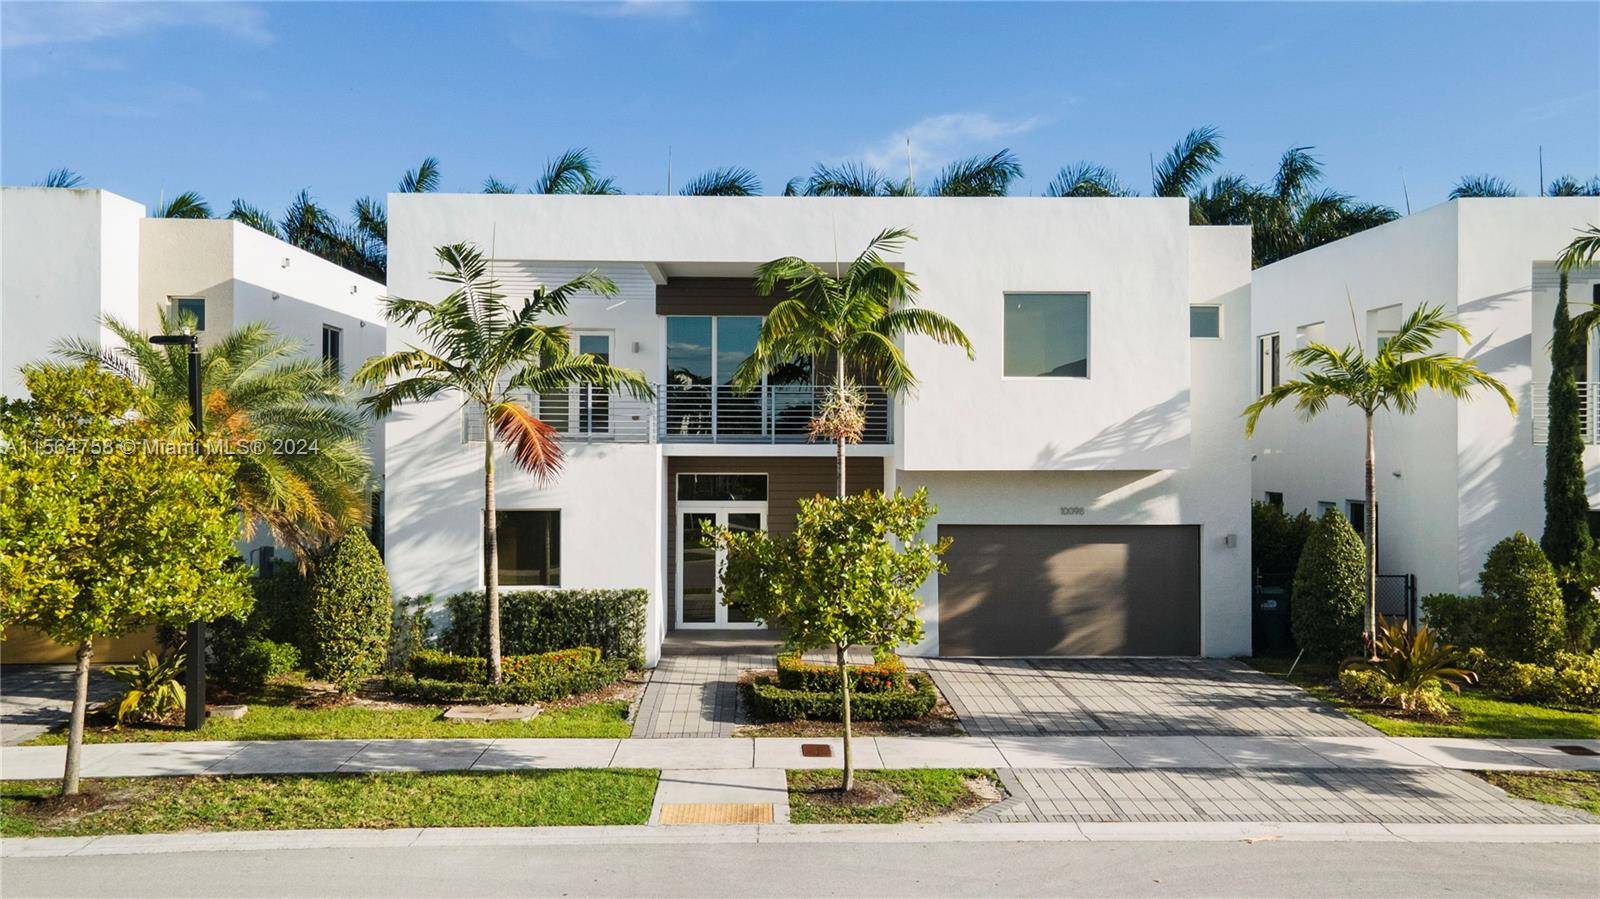 Beautiful and Modern home with an amazing pool in Doral MODERN 60, Upgraded high end Gourmet kitchen, cabinets w pull out shelves.